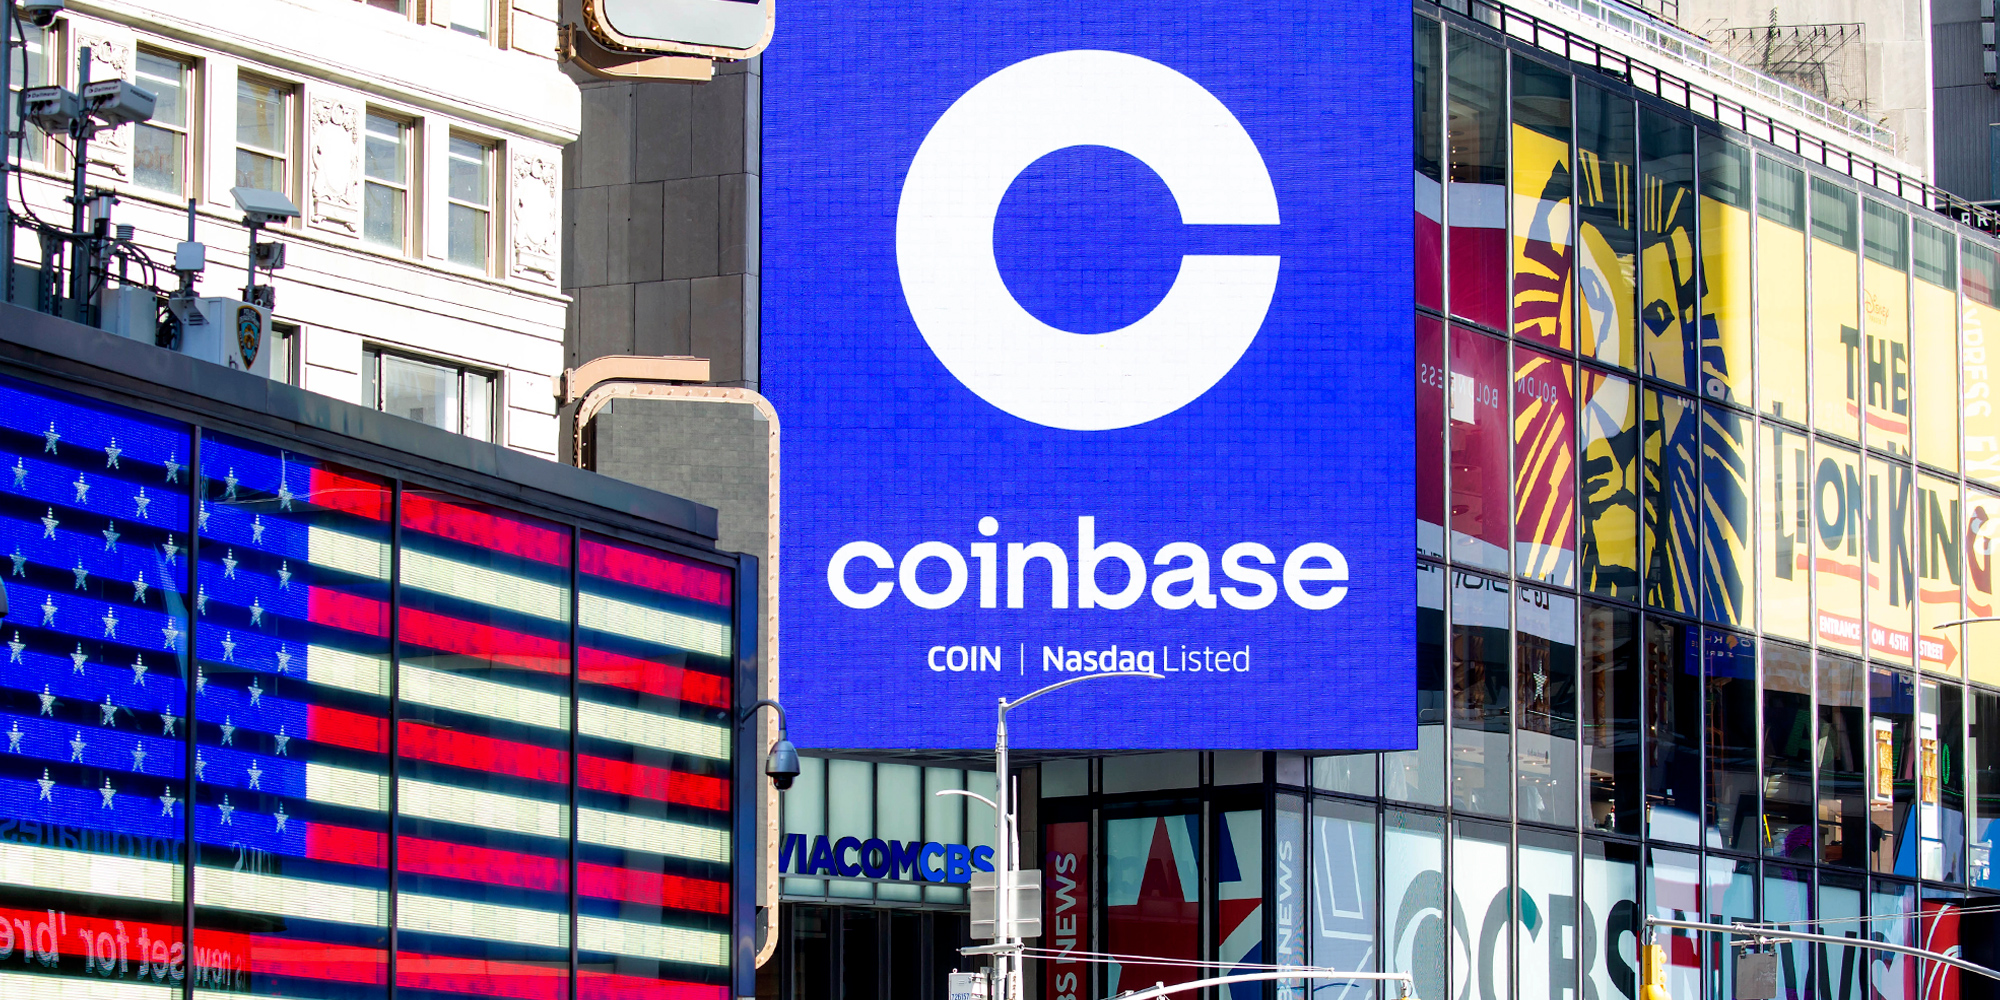 Cryptocurrency Titan Coinbase Providing “Geo Tracking Data” to ICE